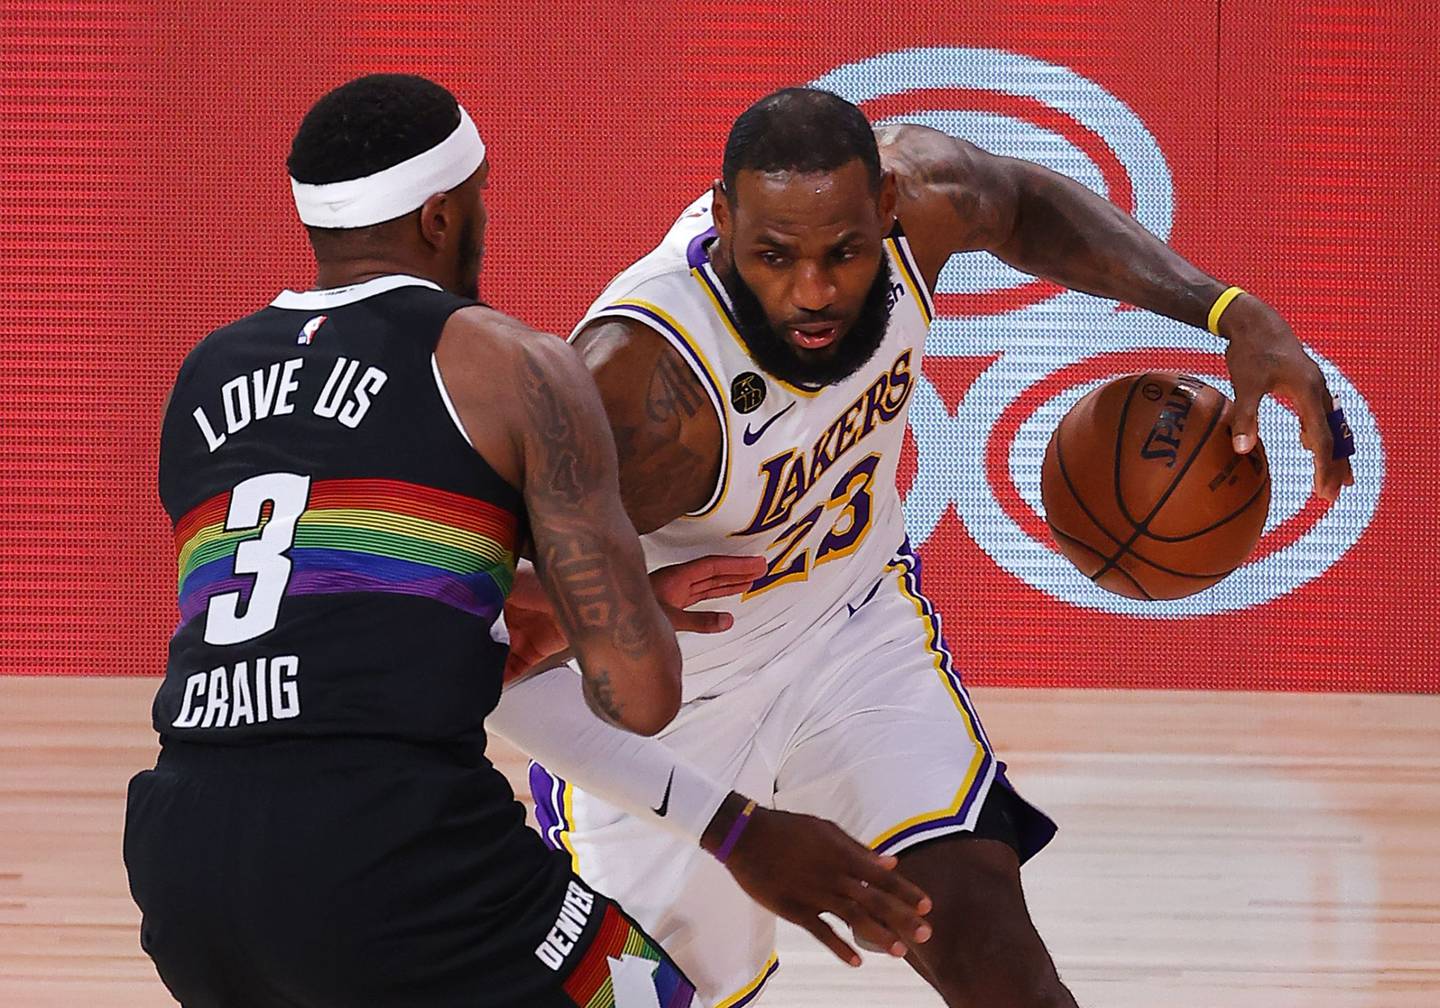 LeBron James #23 of the Los Angeles Lakers drives the ball against Torrey Craig #3 of the Denver Nuggets during the second quarter in Game Three of the Western Conference Finals during the 2020 NBA Playoffs at AdventHealth Arena at the ESPN Wide World Of Sports Complex on September 22, 2020 in Lake Buena Vista, Florida.